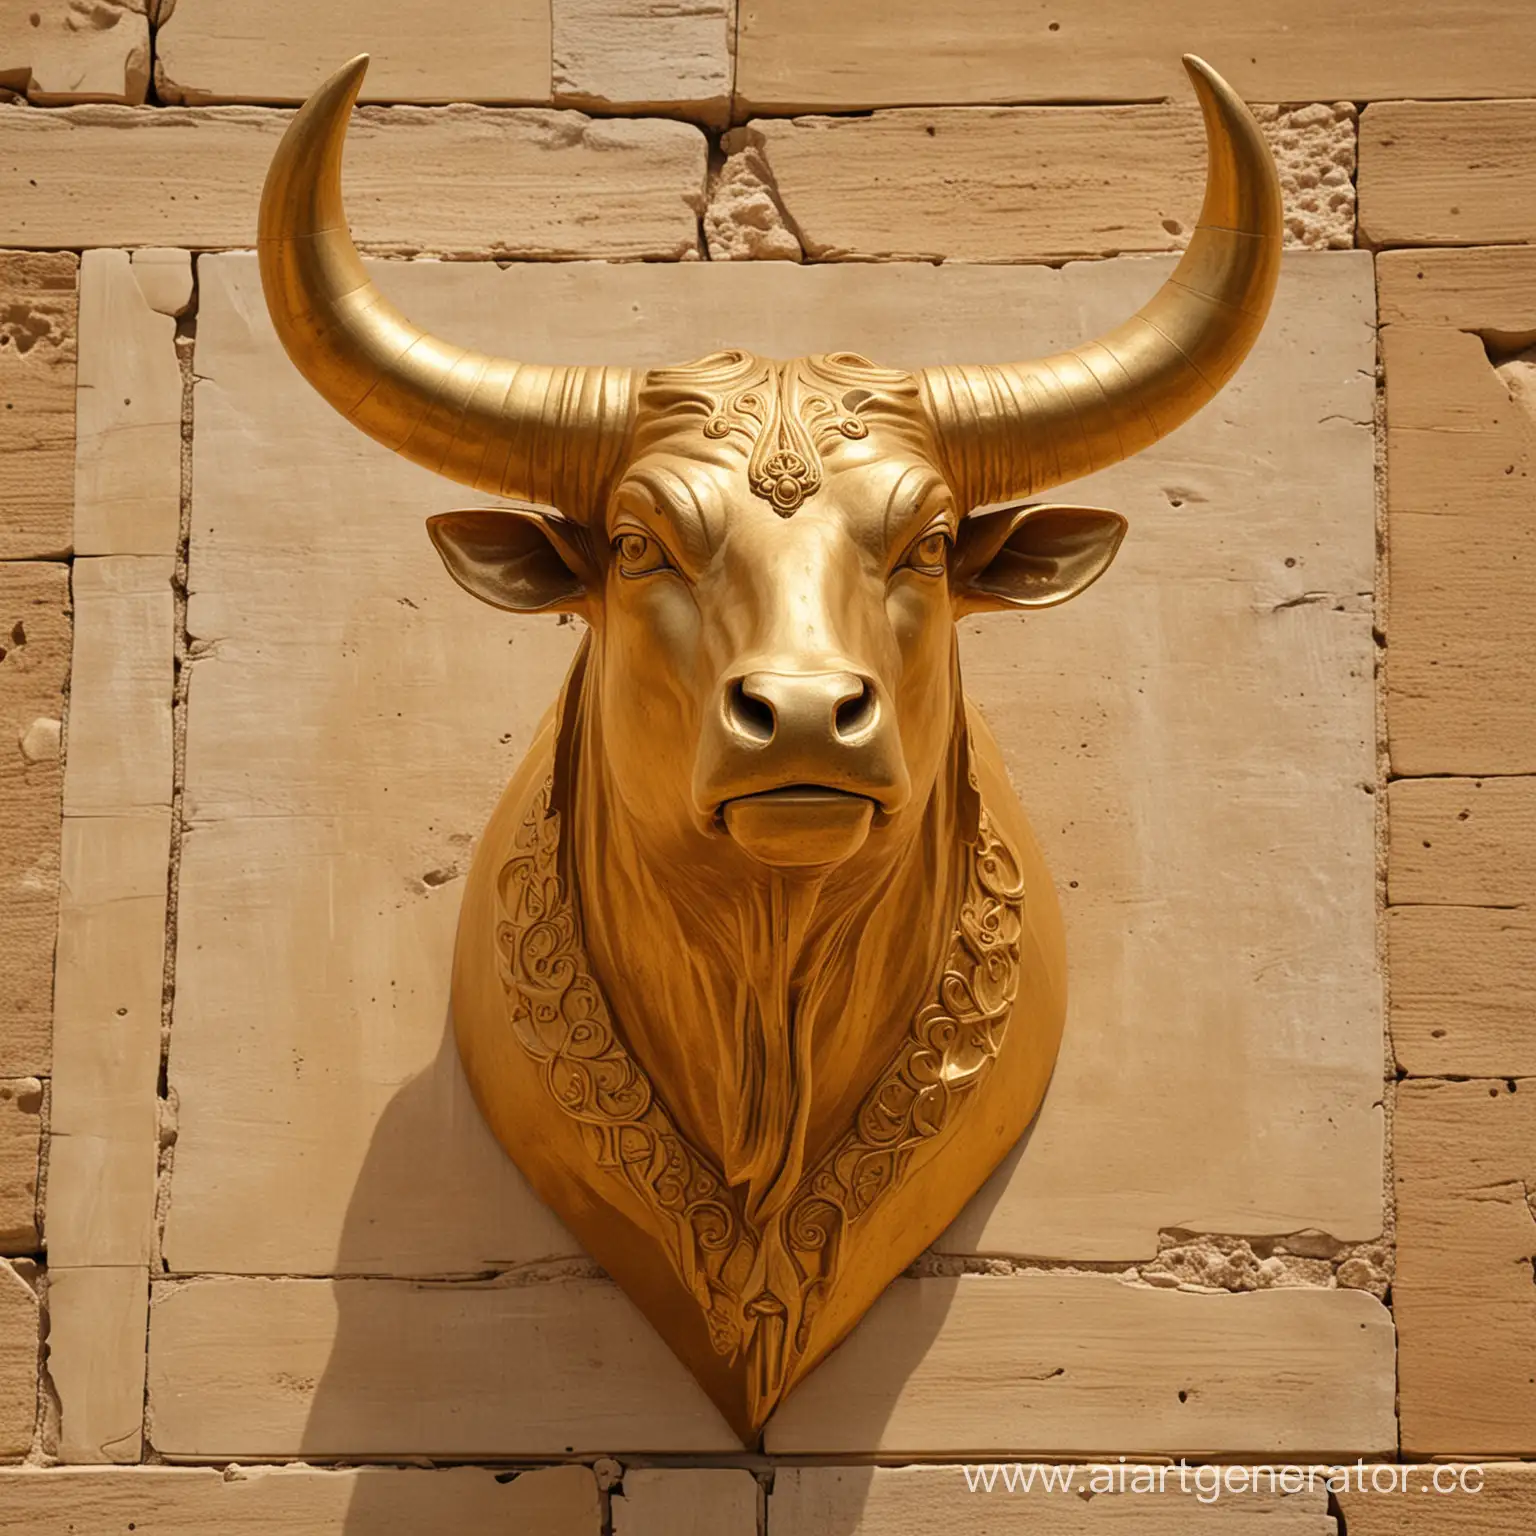 Golden-Taurus-Statue-at-Pyramids-A-Journey-through-Ancient-Mysteries-and-Divine-Symbolism